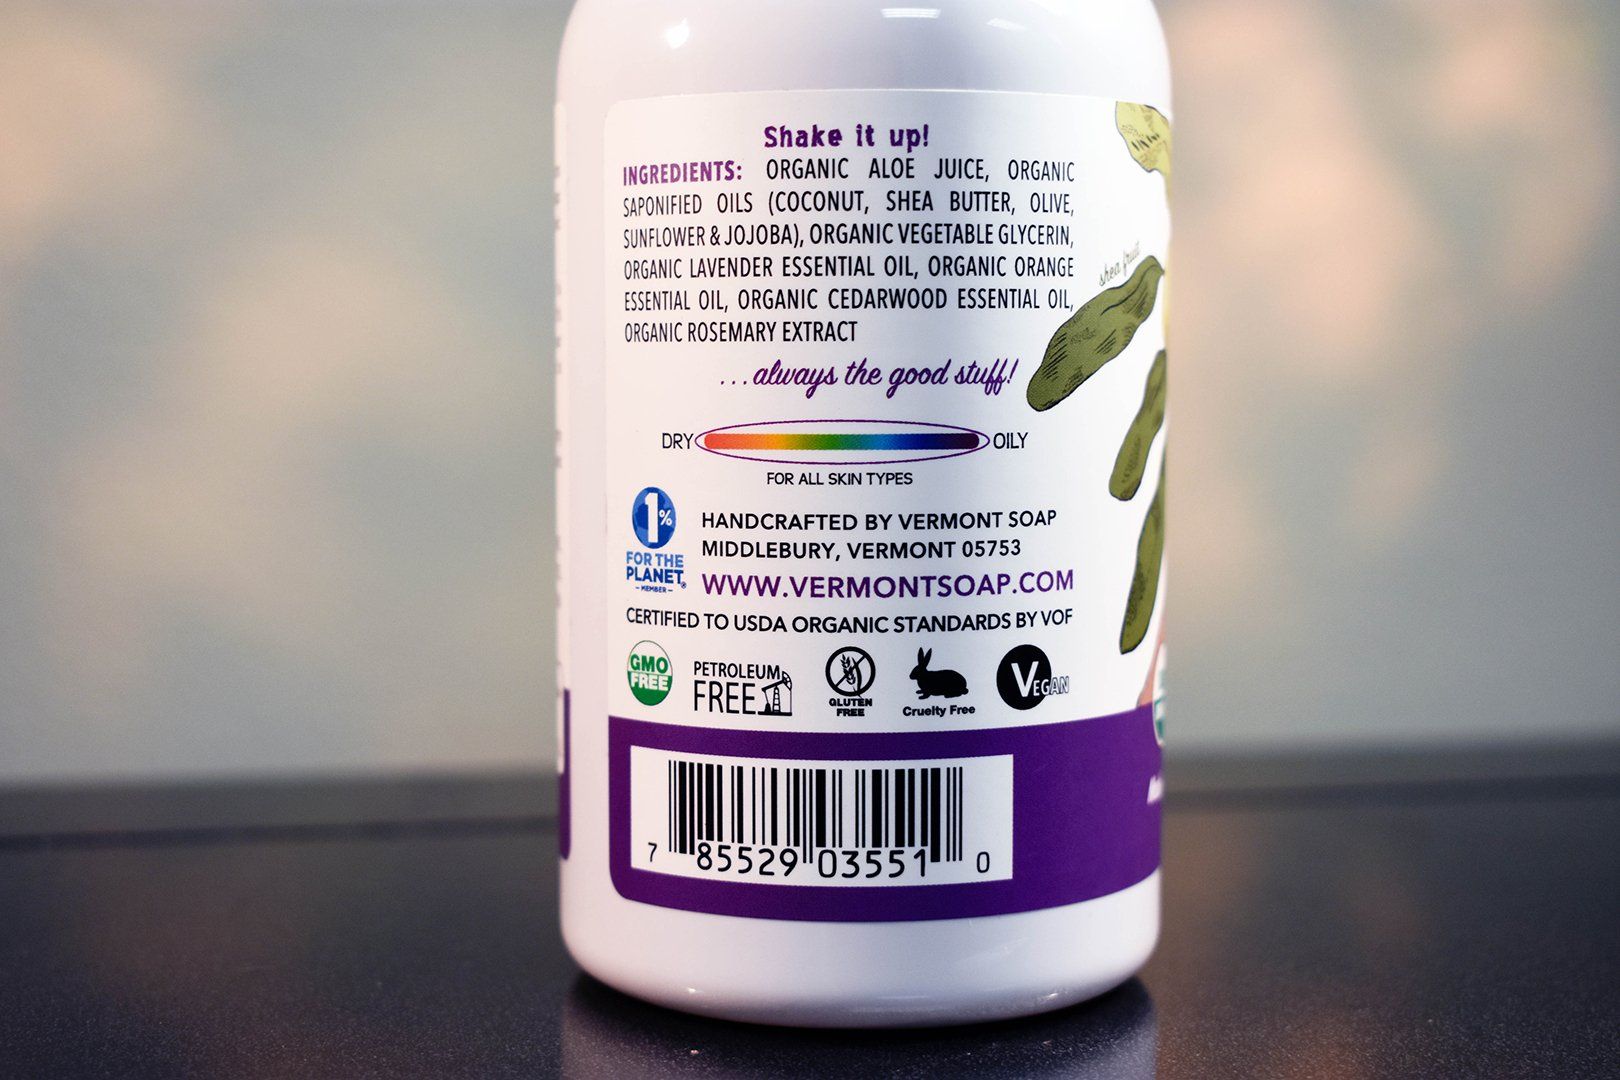 Informative Graphics on Health & Beauty Label